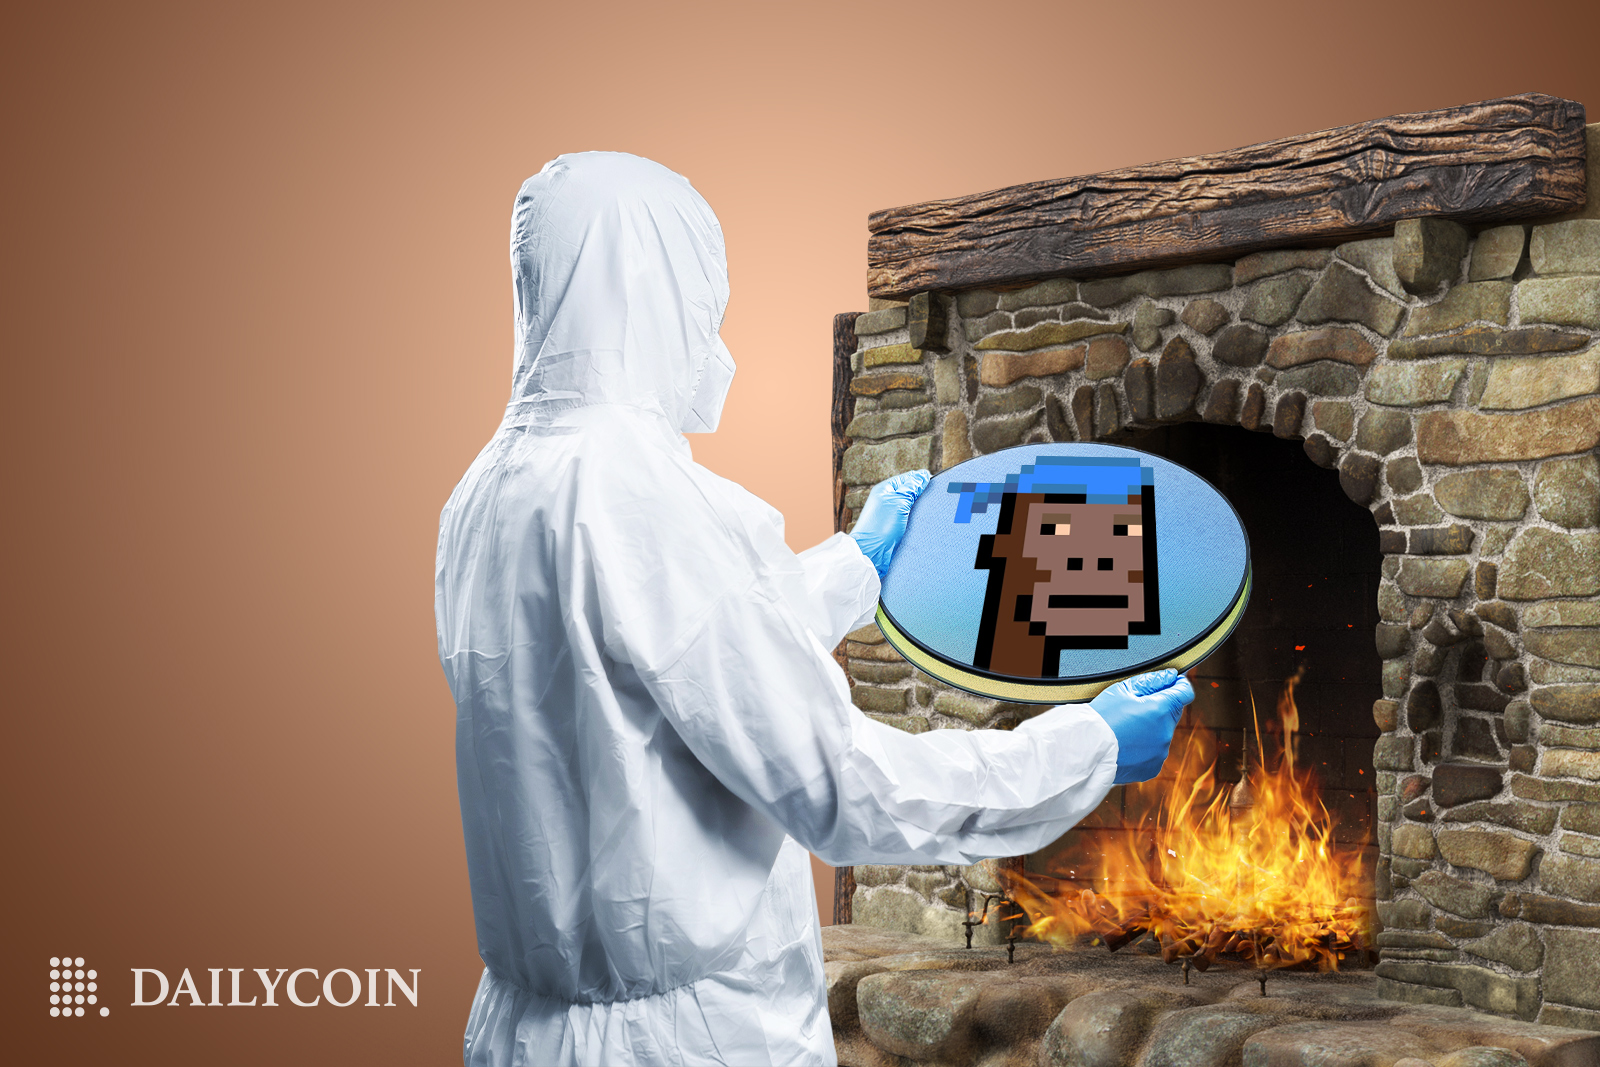 User tossing his CryptoPunk into a fire oven.